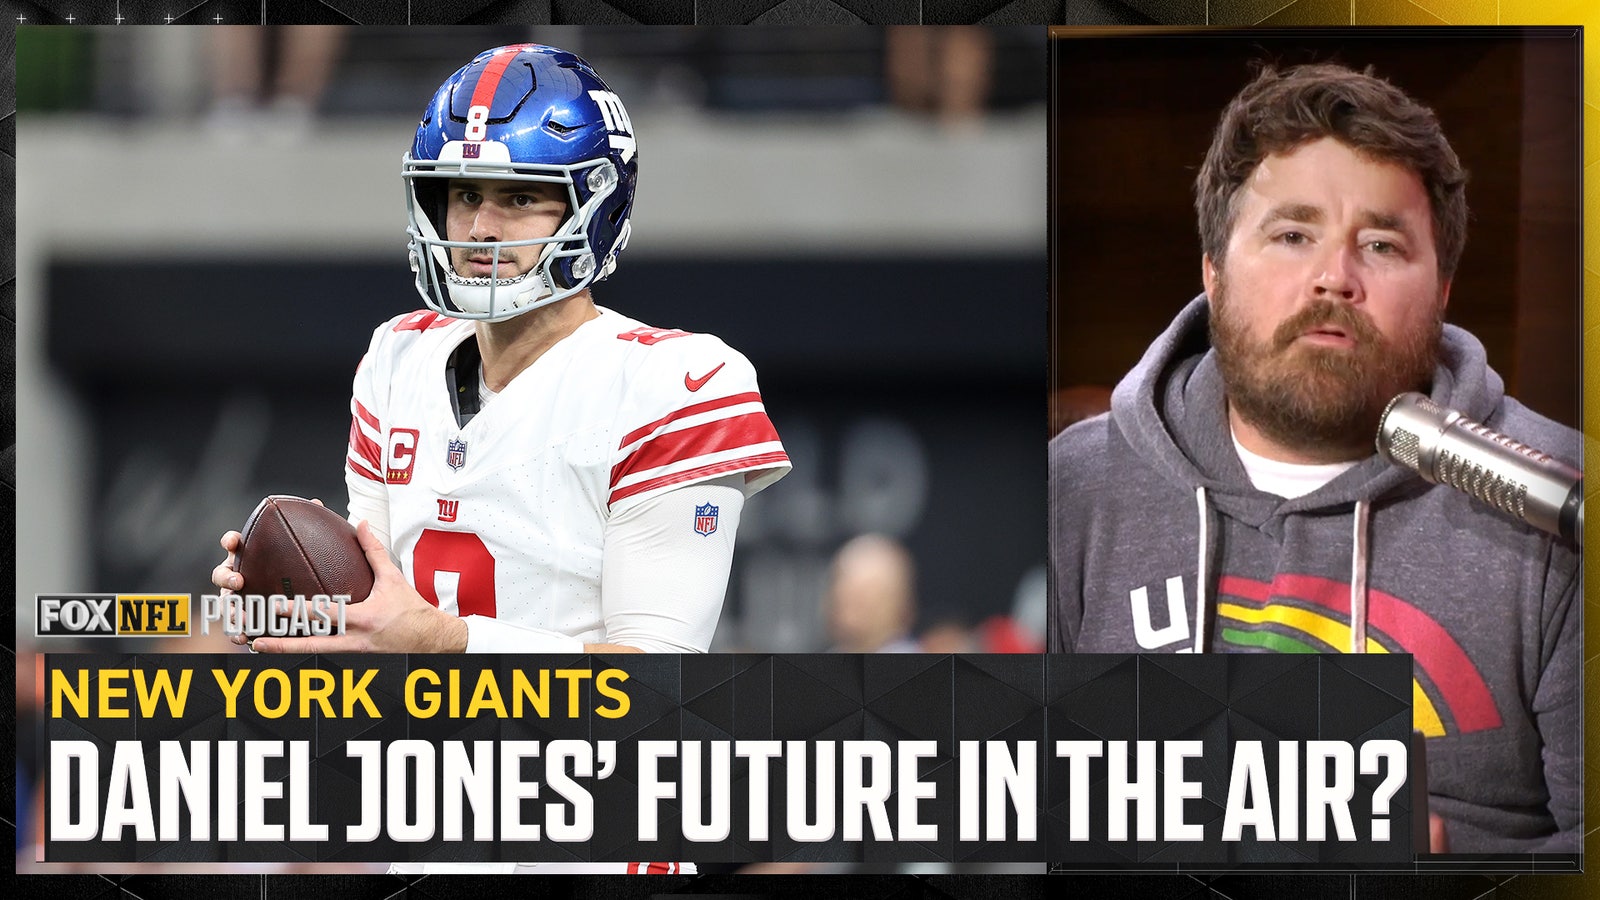 Is Daniel Jones' future with the Giants in jeopardy after ACL injury?